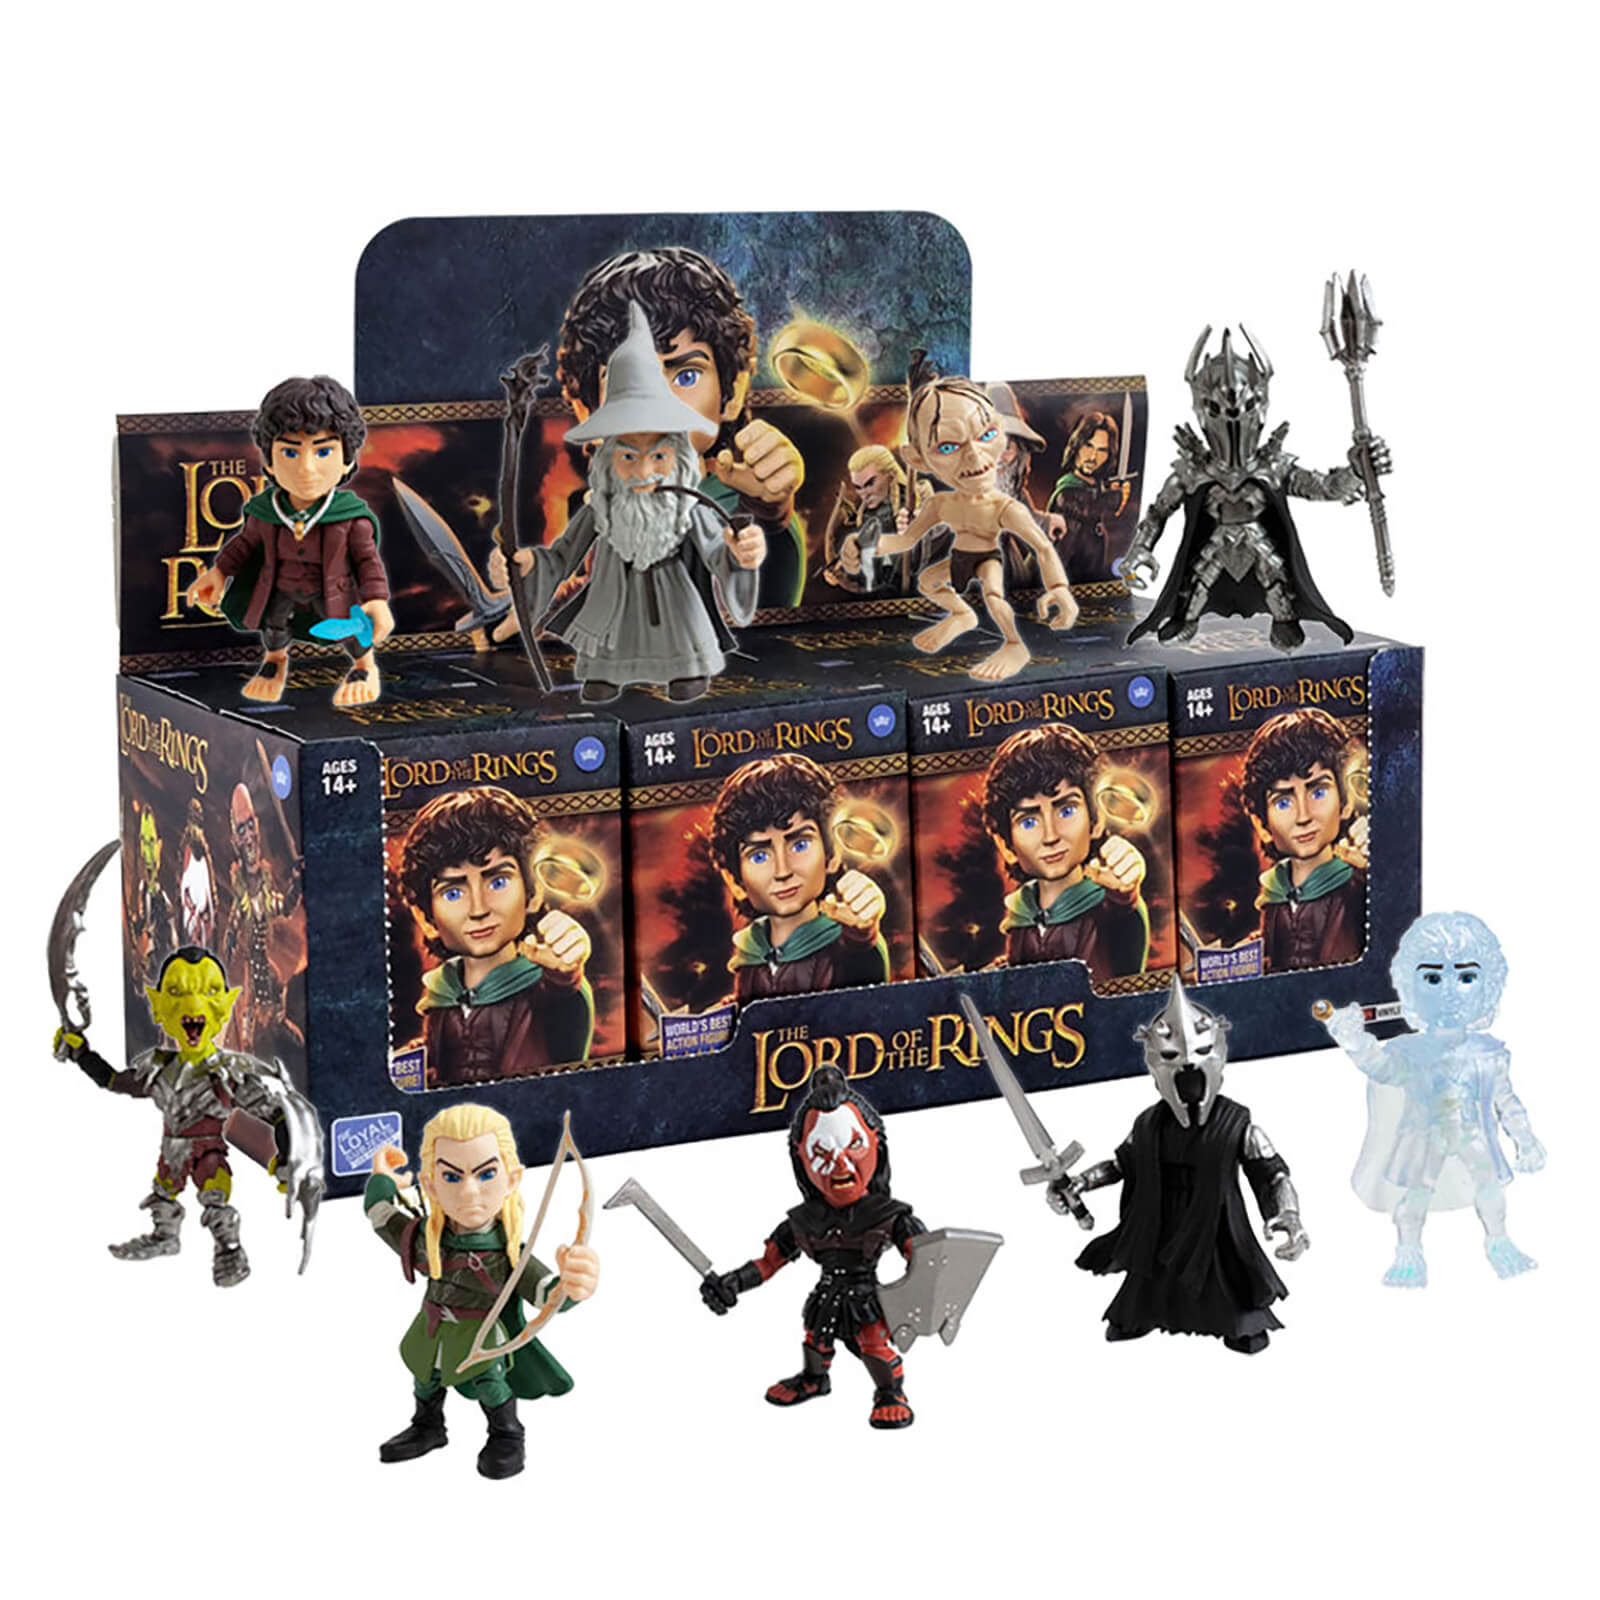 Image of Loyal Subjects Lord of the Rings - Blind Box Action Fig PDQ - 8 Figures Included